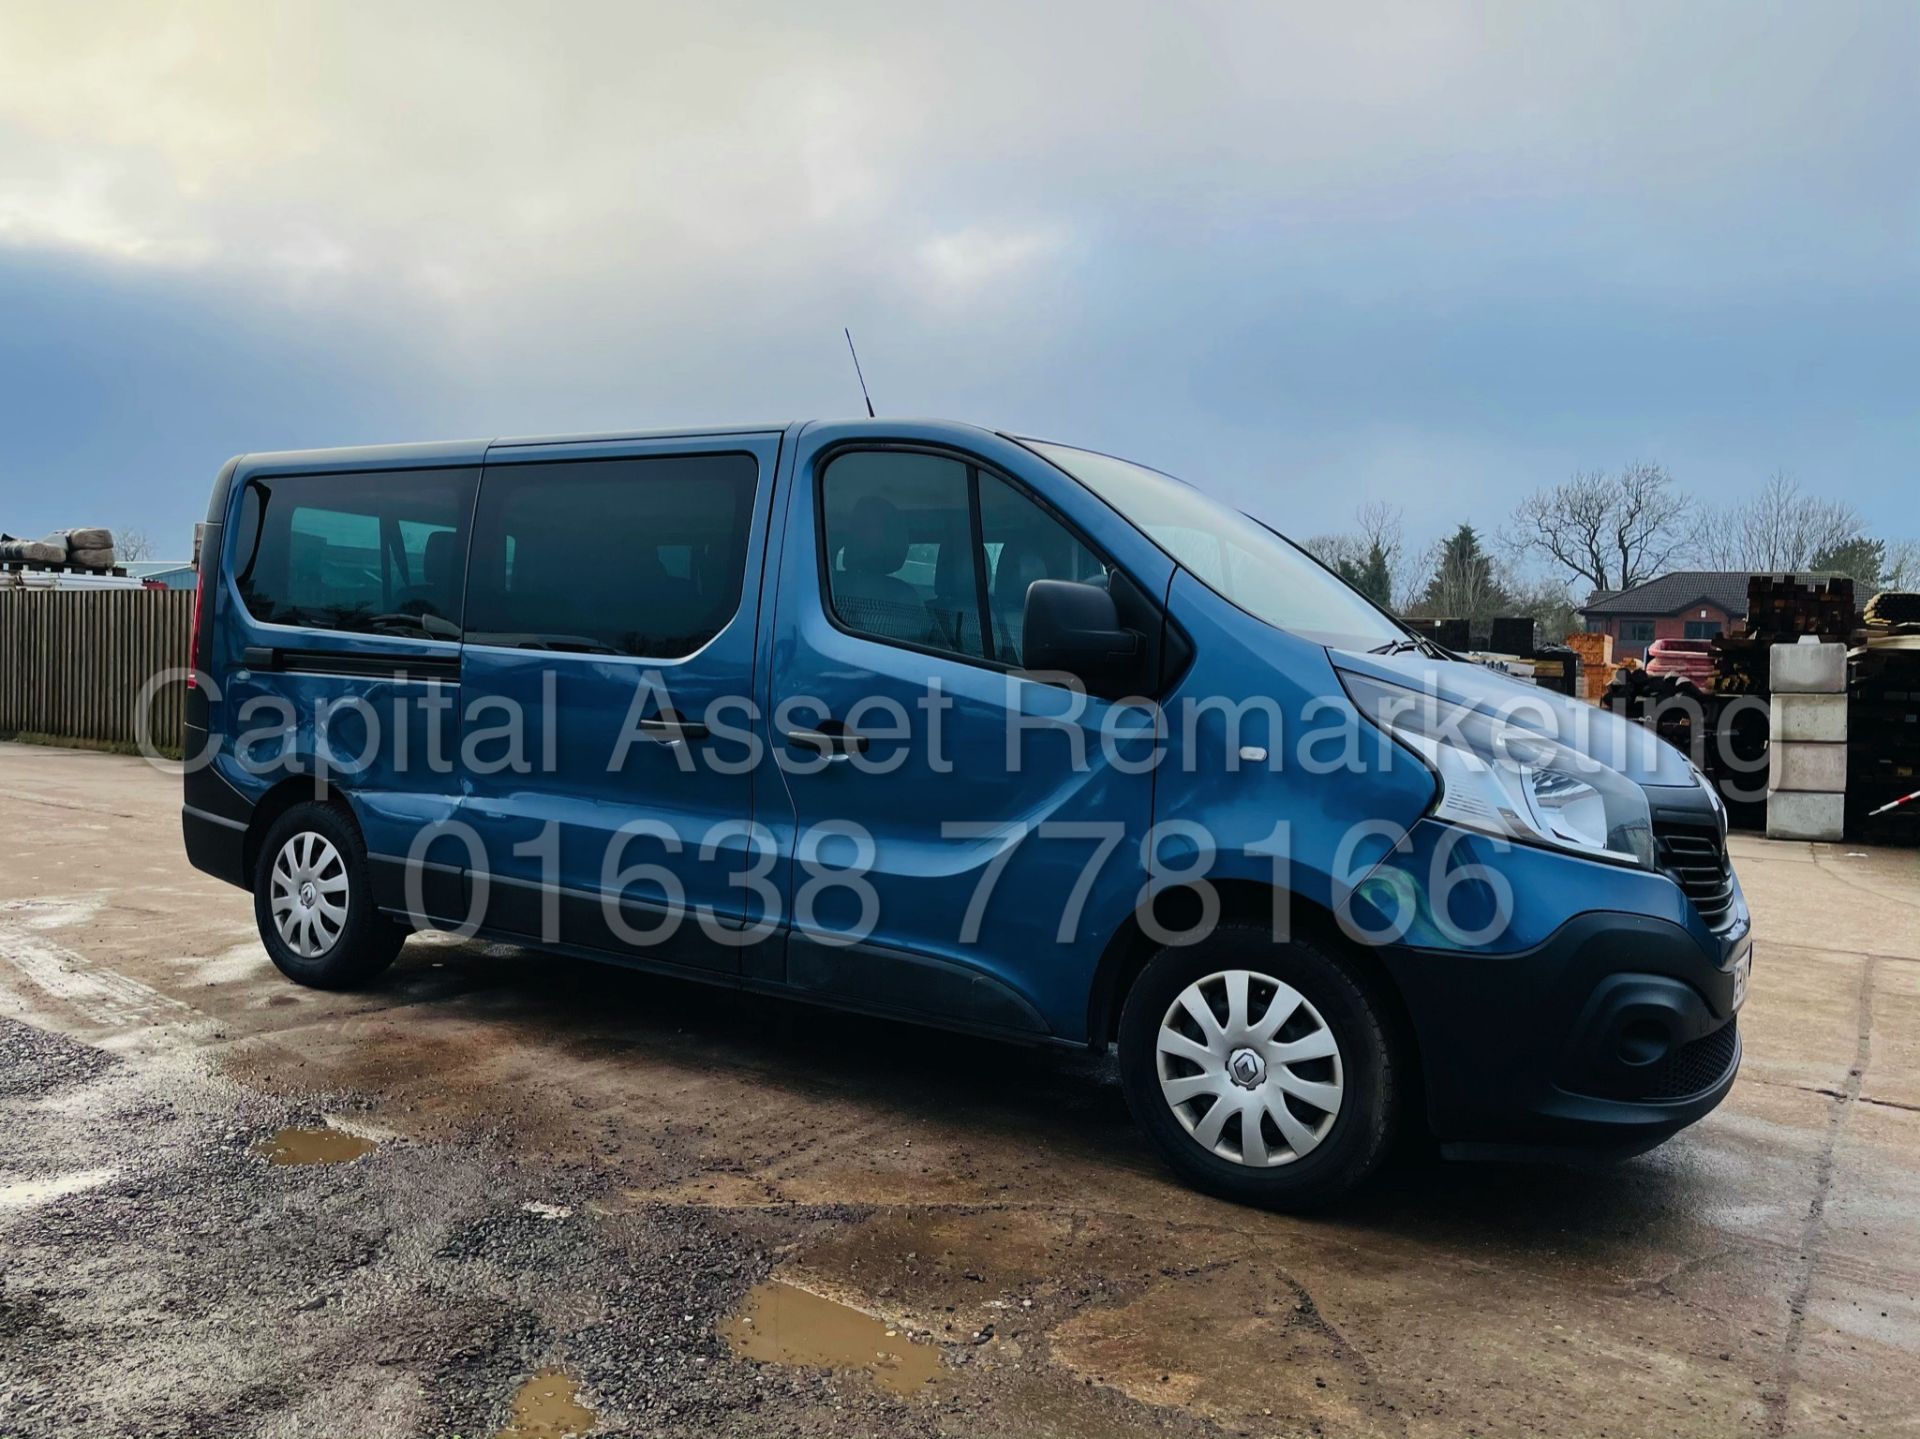 (ON SALE) RENAULT TRAFIC *LWB - 9 SEATER BUS* (2017 - EURO 6) '1.6 DCI - 6 SPEED' *AIR CON* (NO VAT) - Image 11 of 47